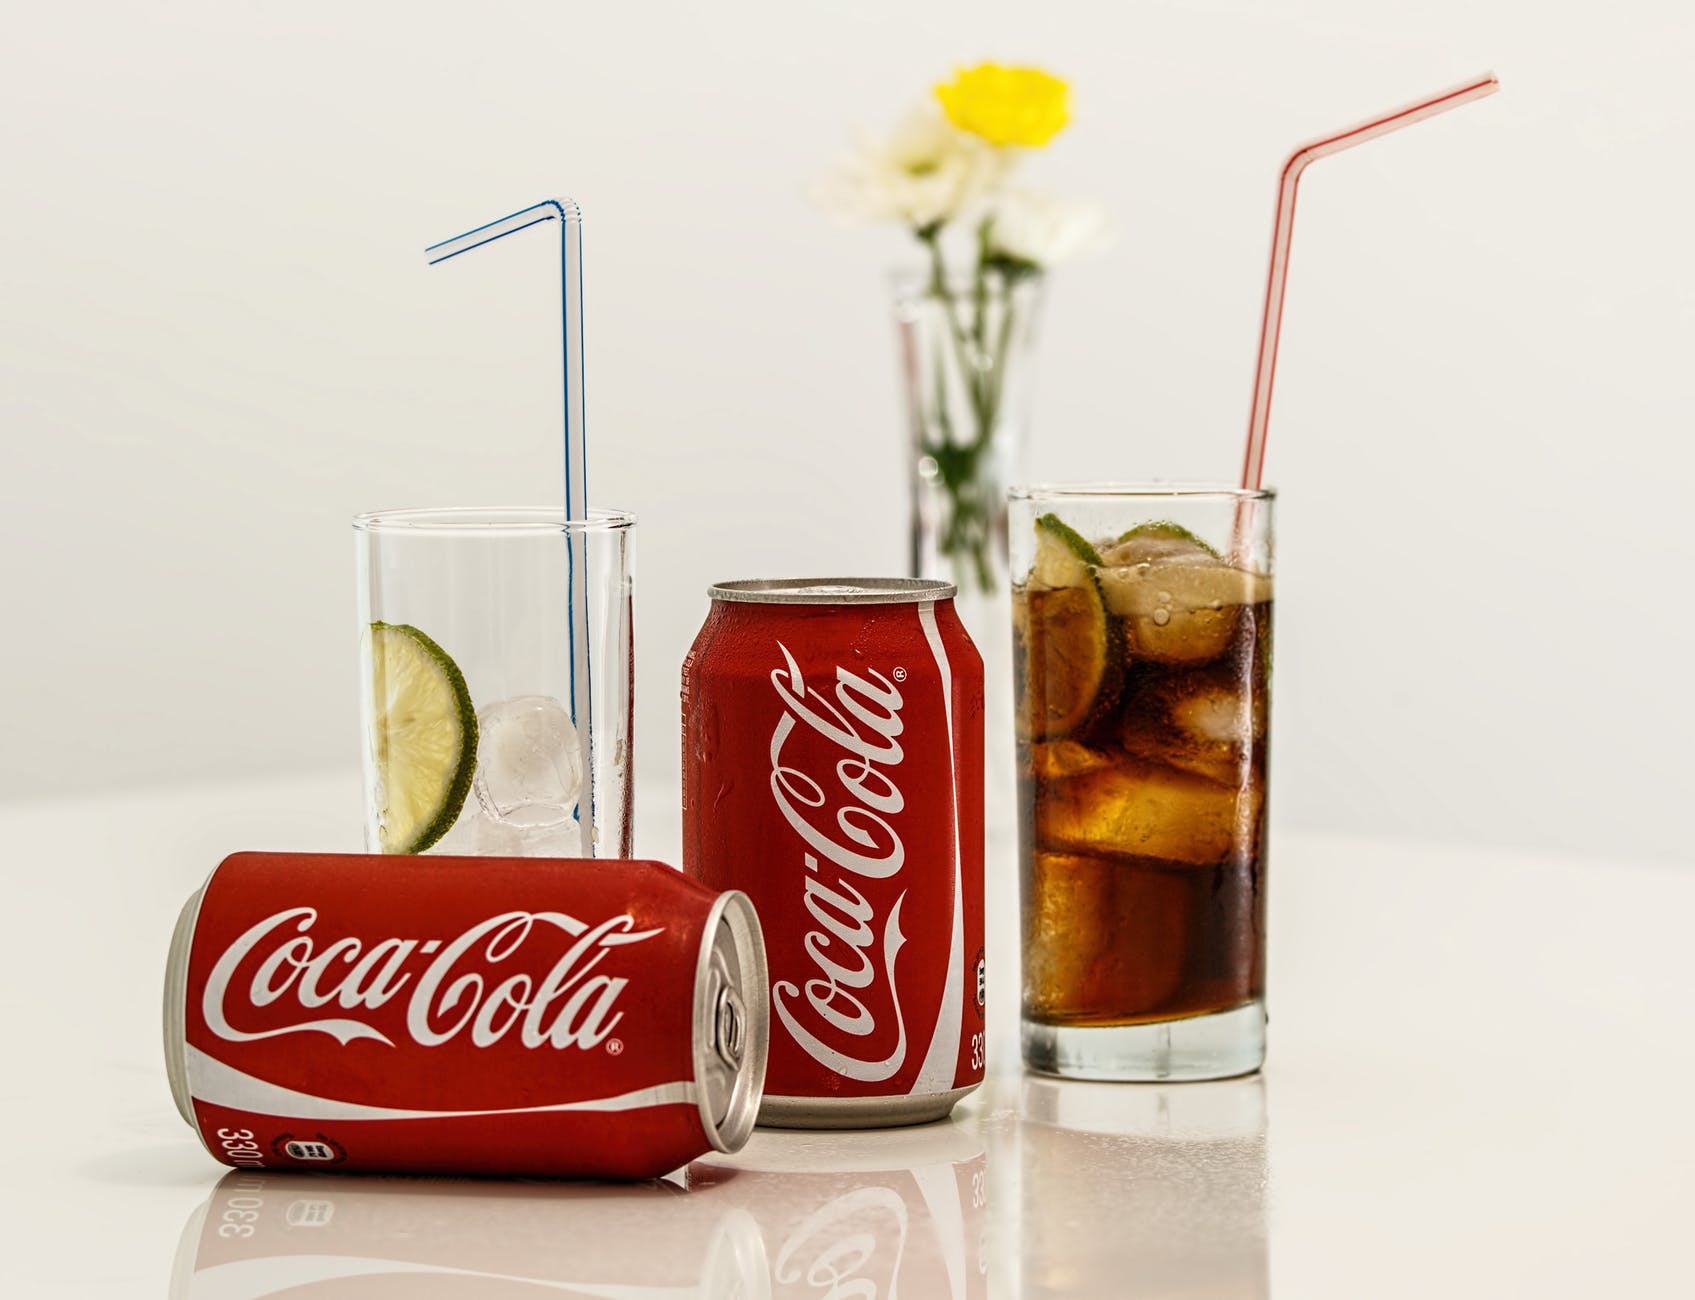 coca cola cans and glasses with lines